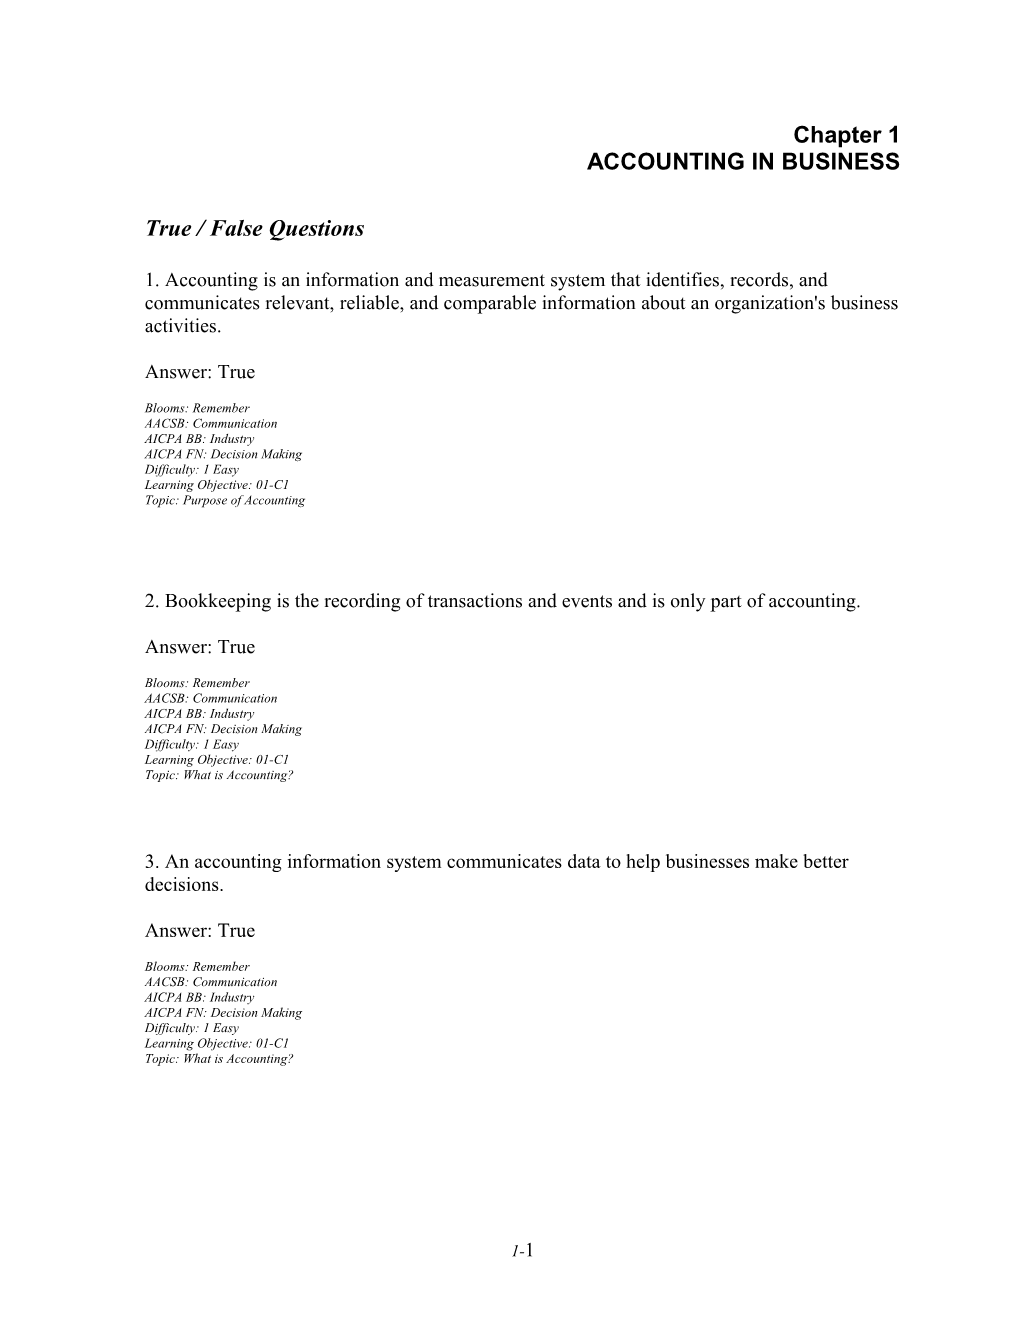 Chapter 001 Accounting in Business